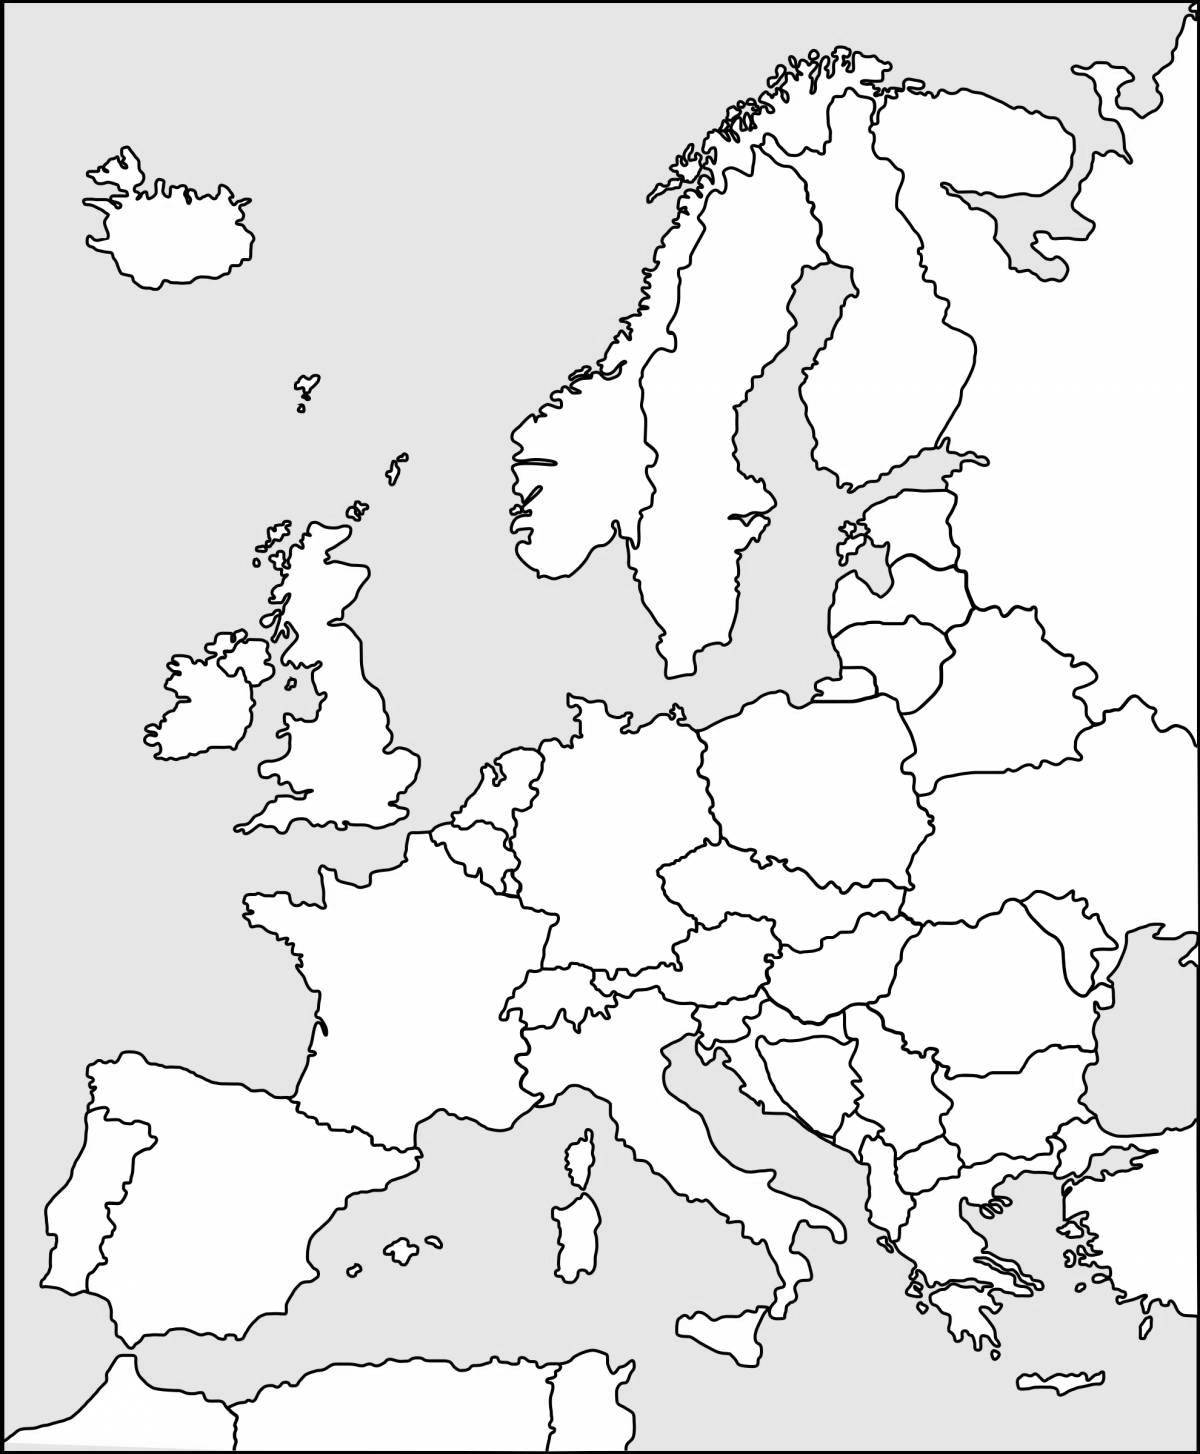 Updated map of europe with countries